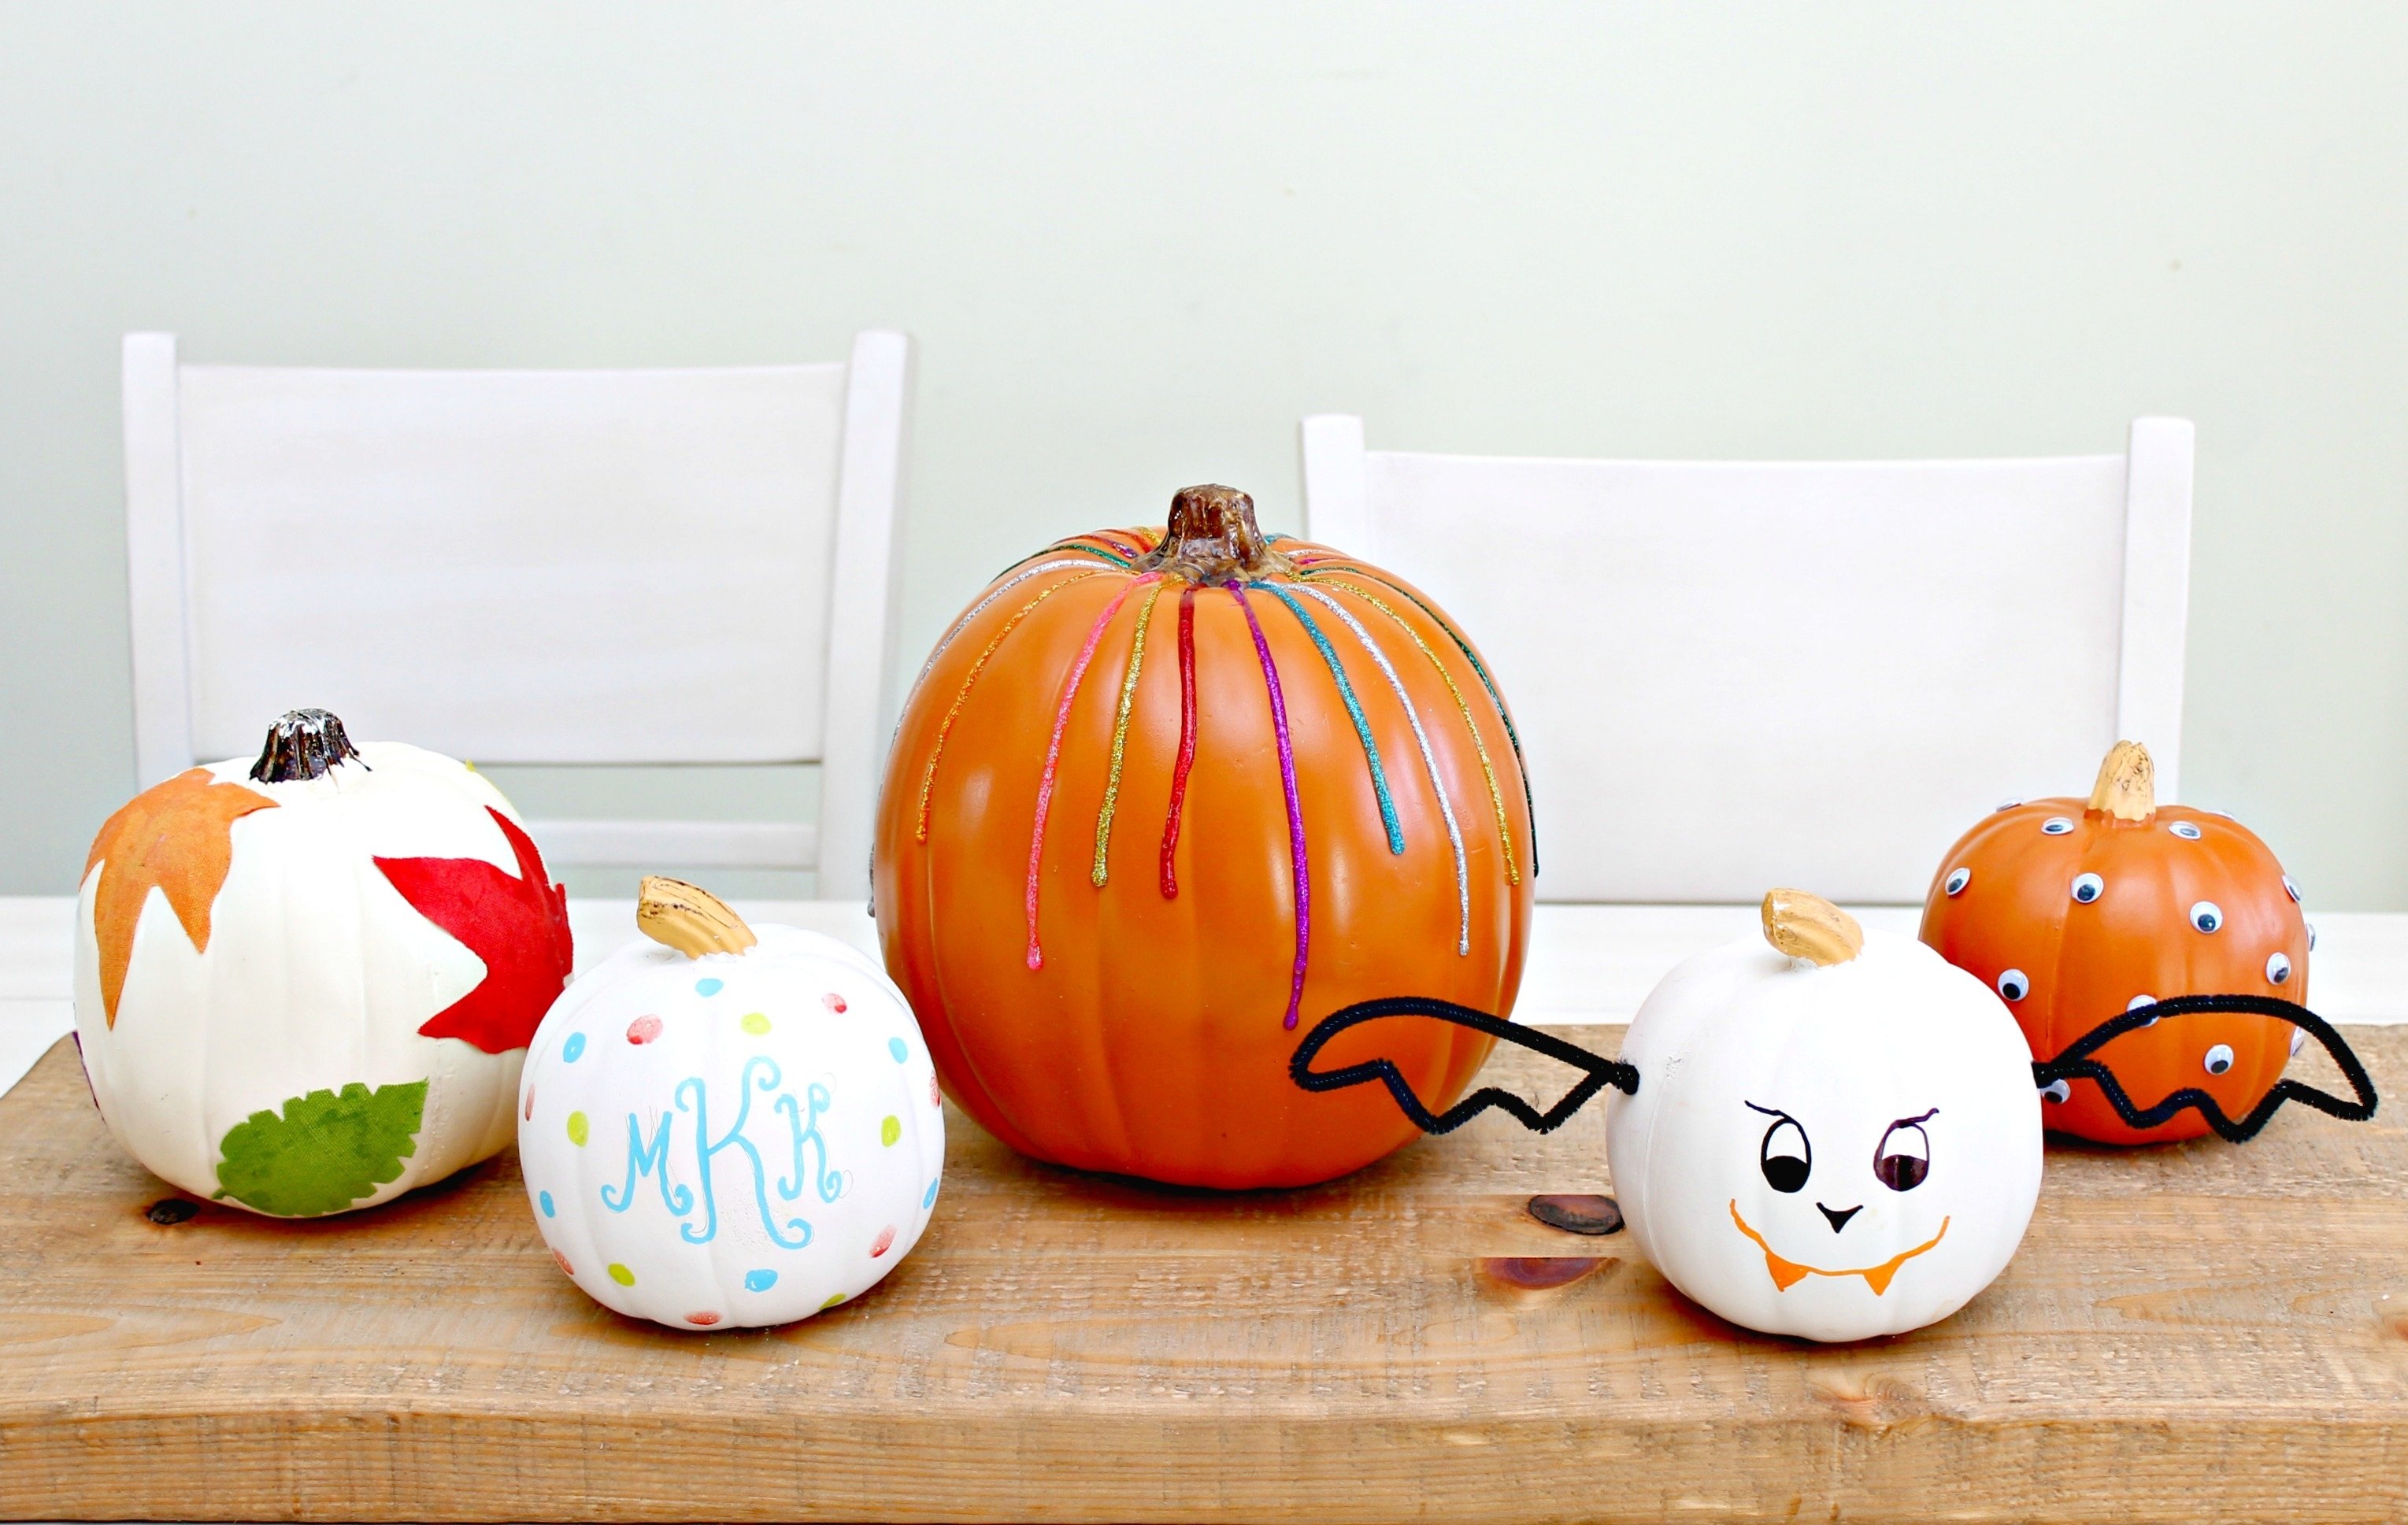 10 Stunning No Carve Pumpkin Decorating Ideas For Kids no carve pumpkin decorating ideas mom 4 real 12 2022